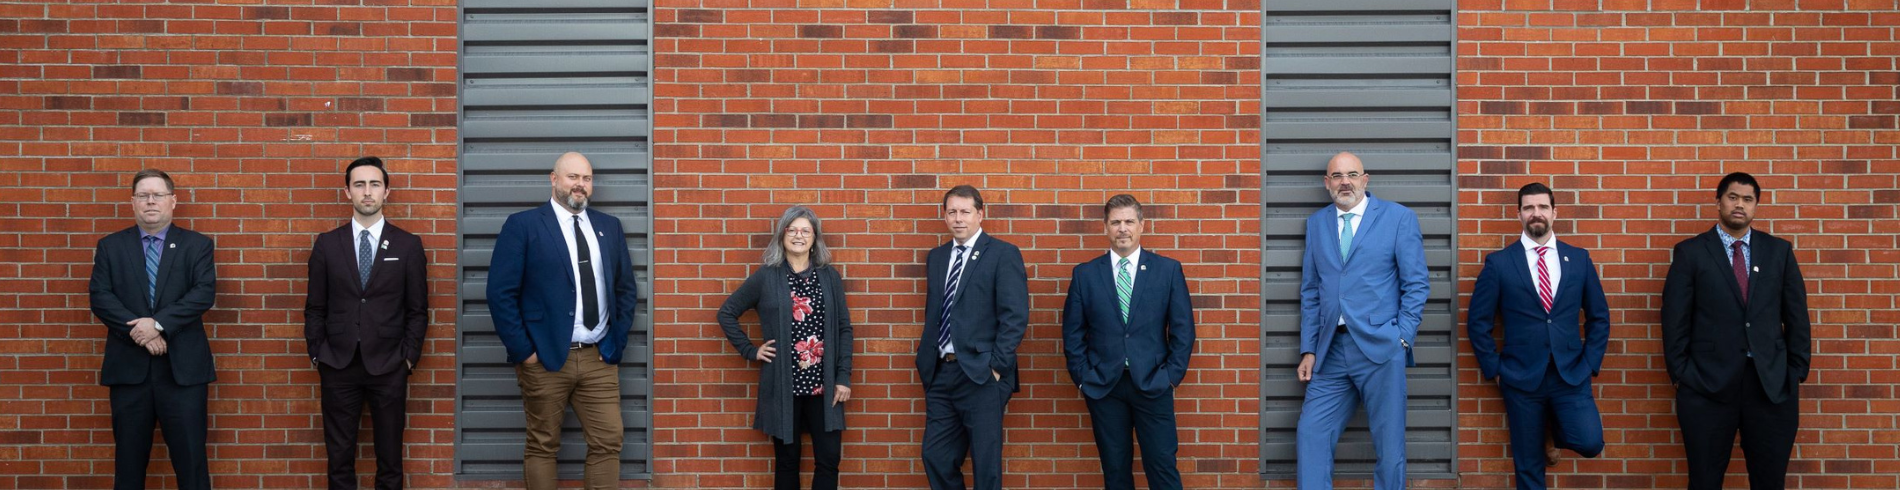 Council members standing next to a brick wall